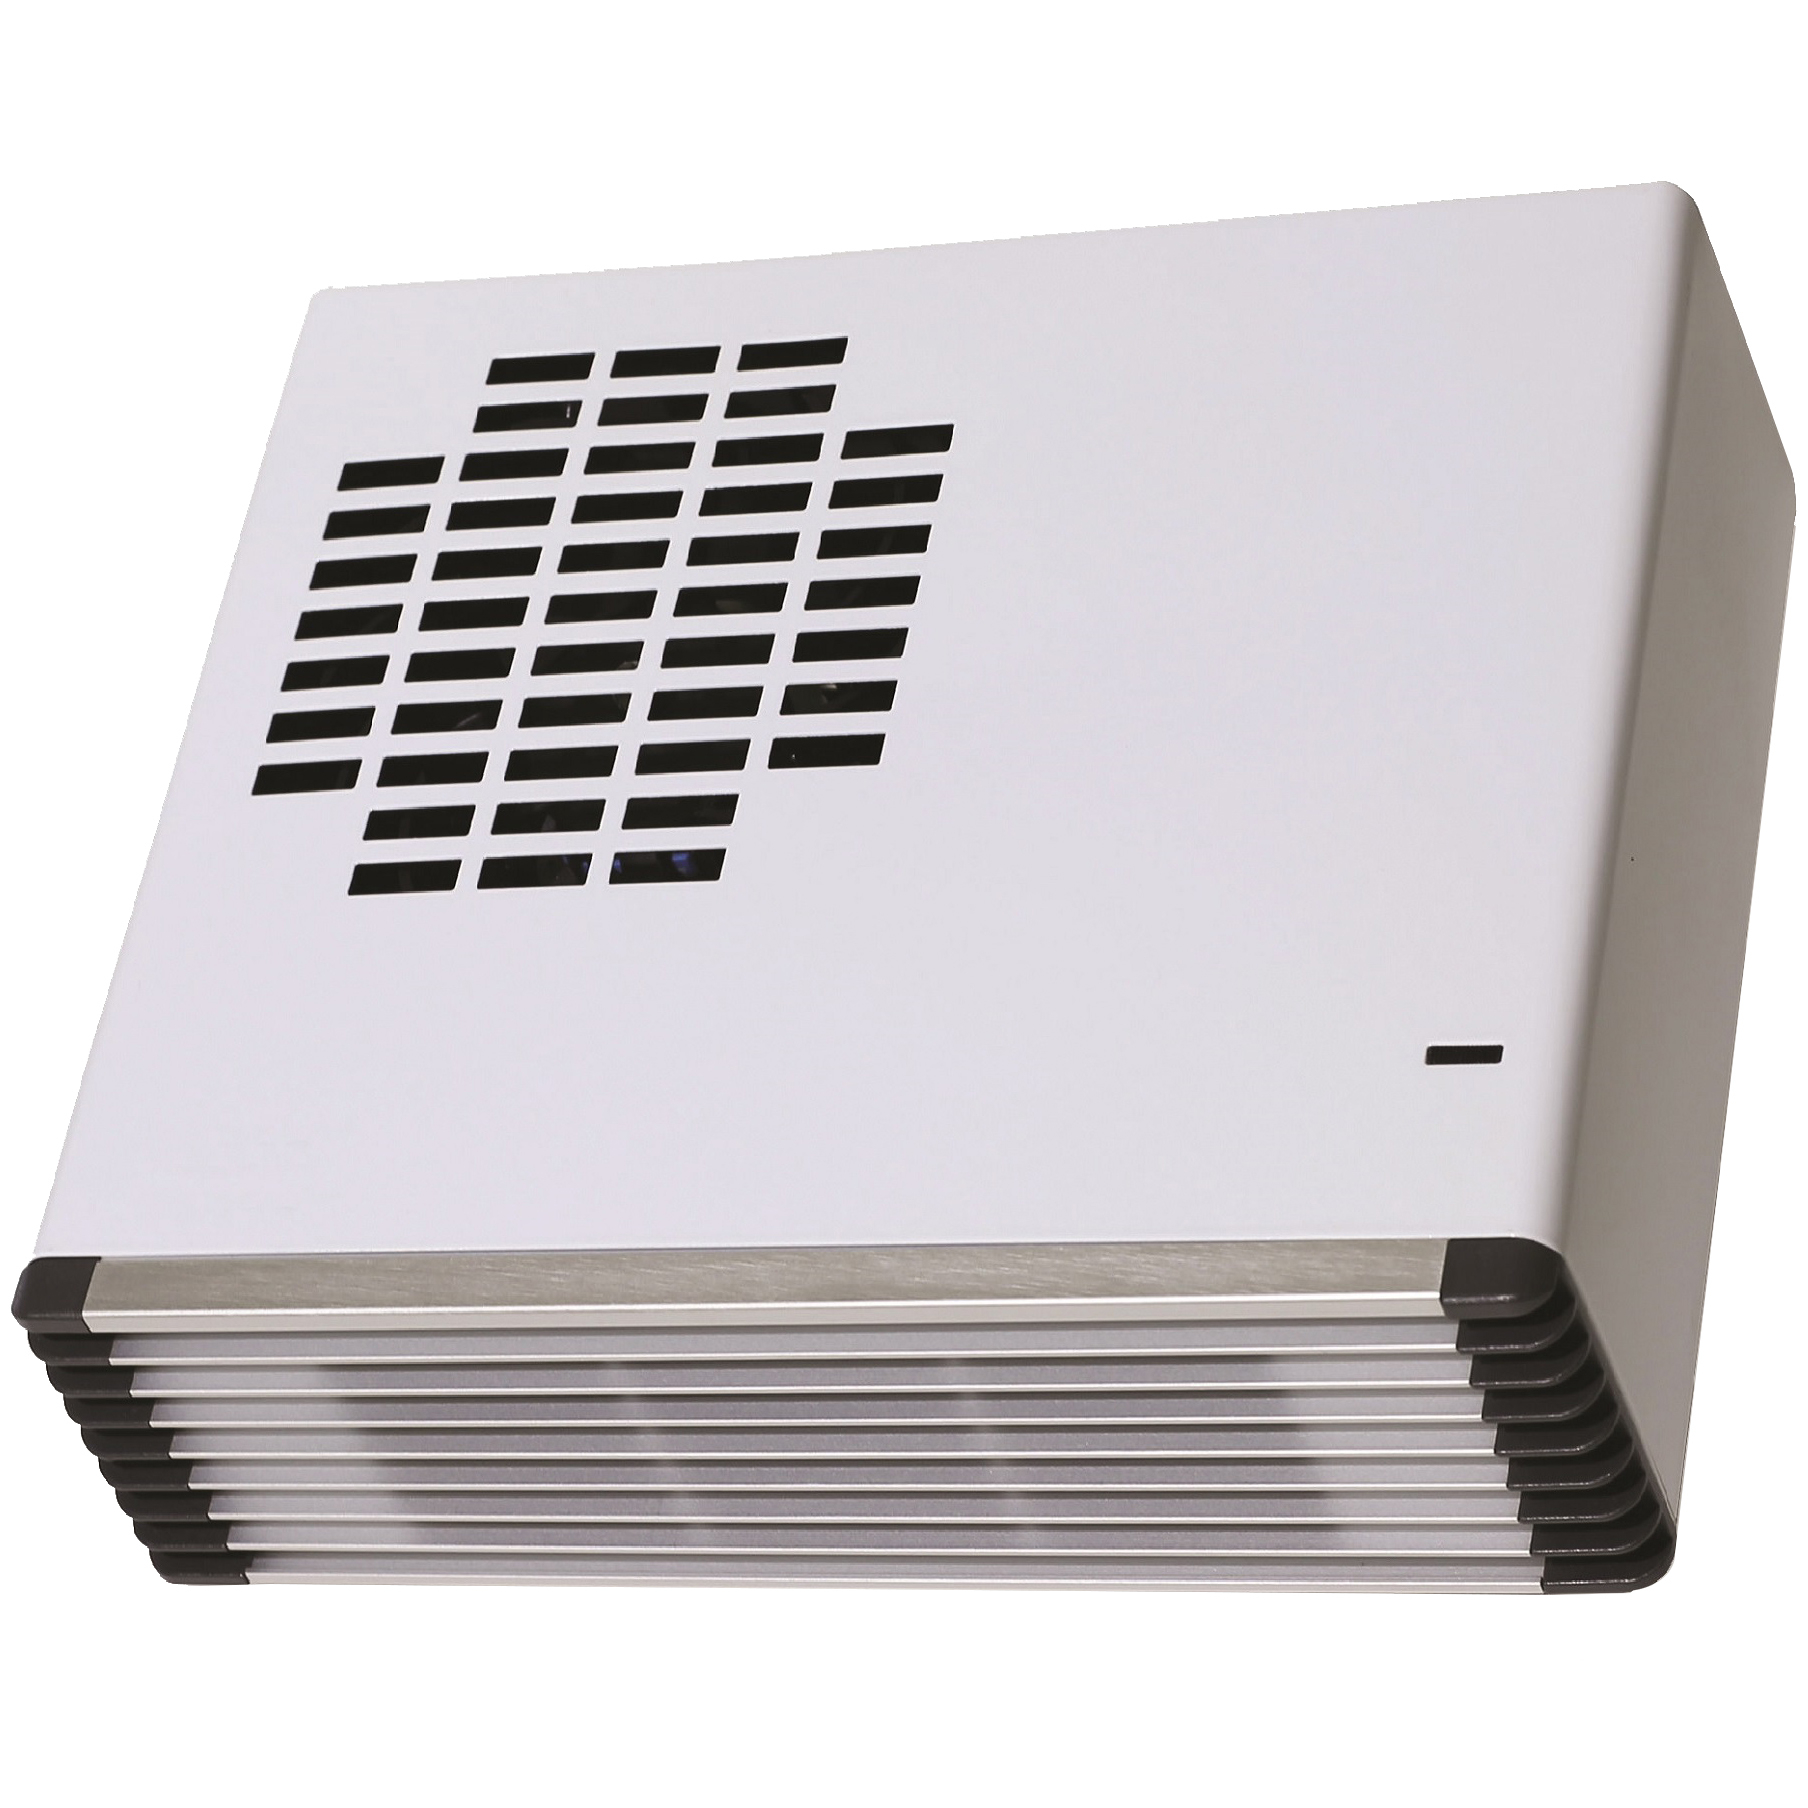 New Bathroom Fan Heater With Pull Out Switch intended for dimensions 1808 X 1808